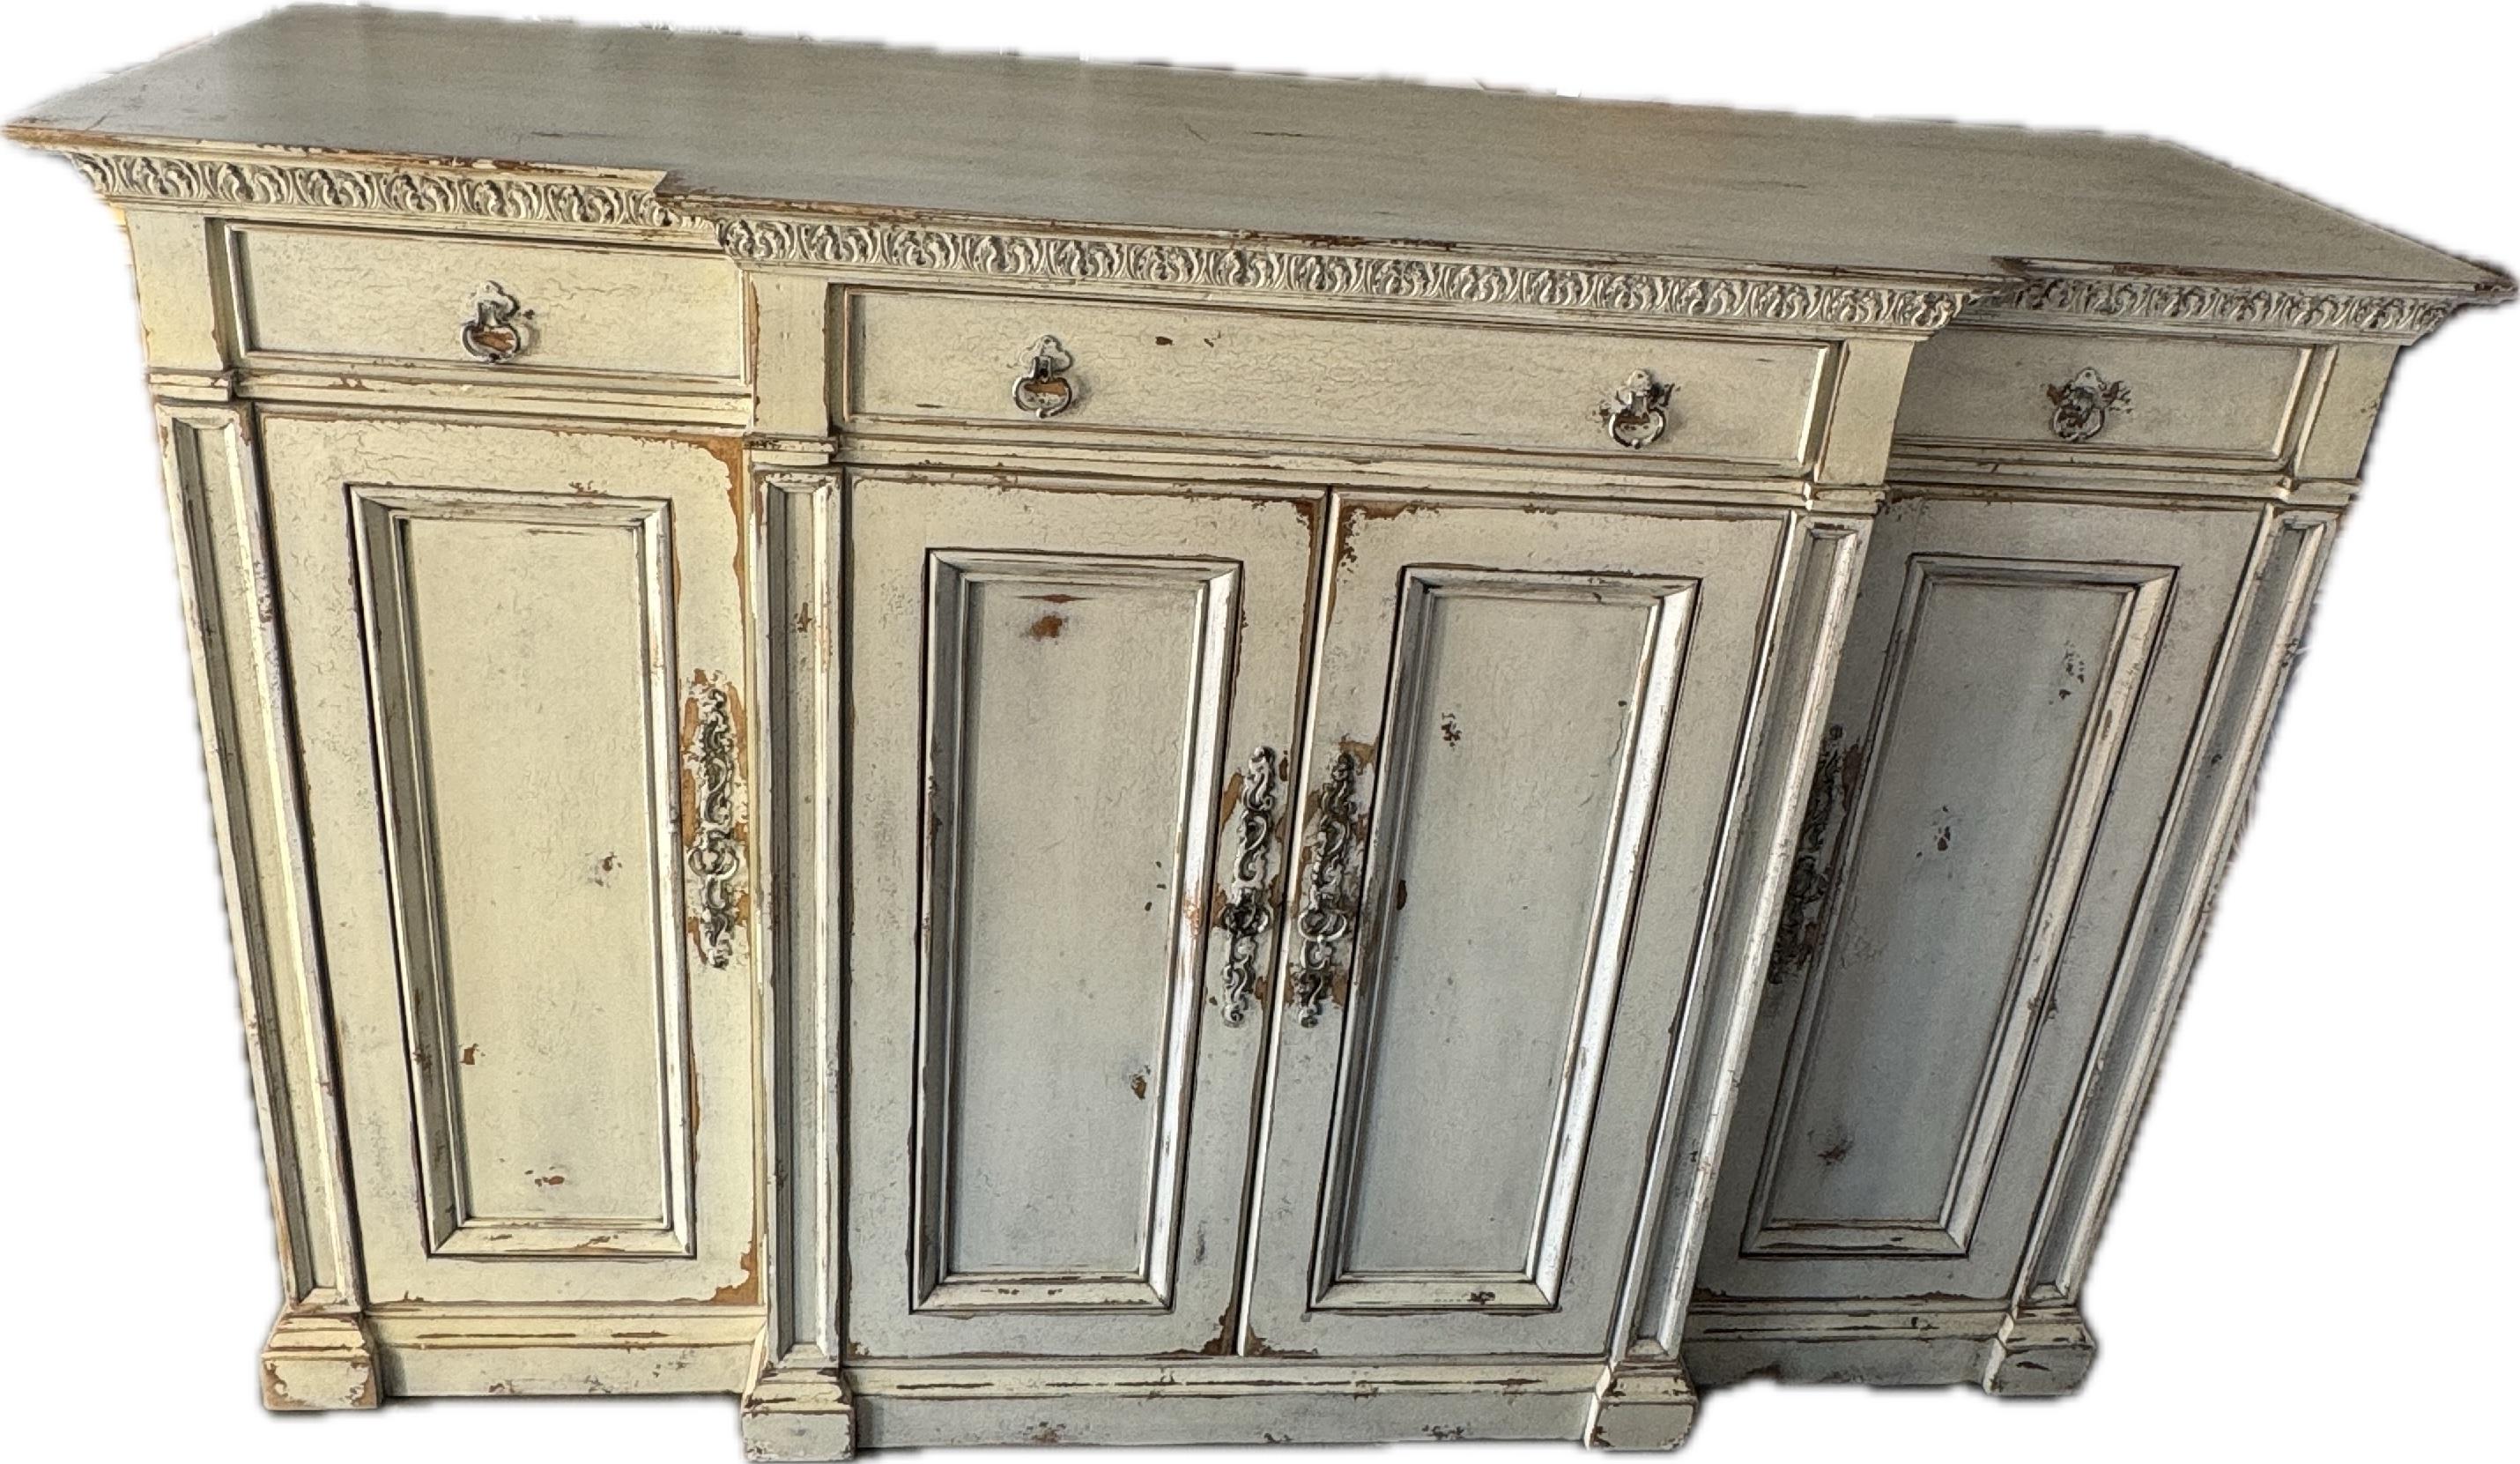 Large Habersham Painted Sideboard Cabinet with handcrafted trim along the top and carving on the cabinet pulls deliver an inviting and warm design with the intricate detailing throughout.
Habersham has been creating fine furniture and custom-fitted